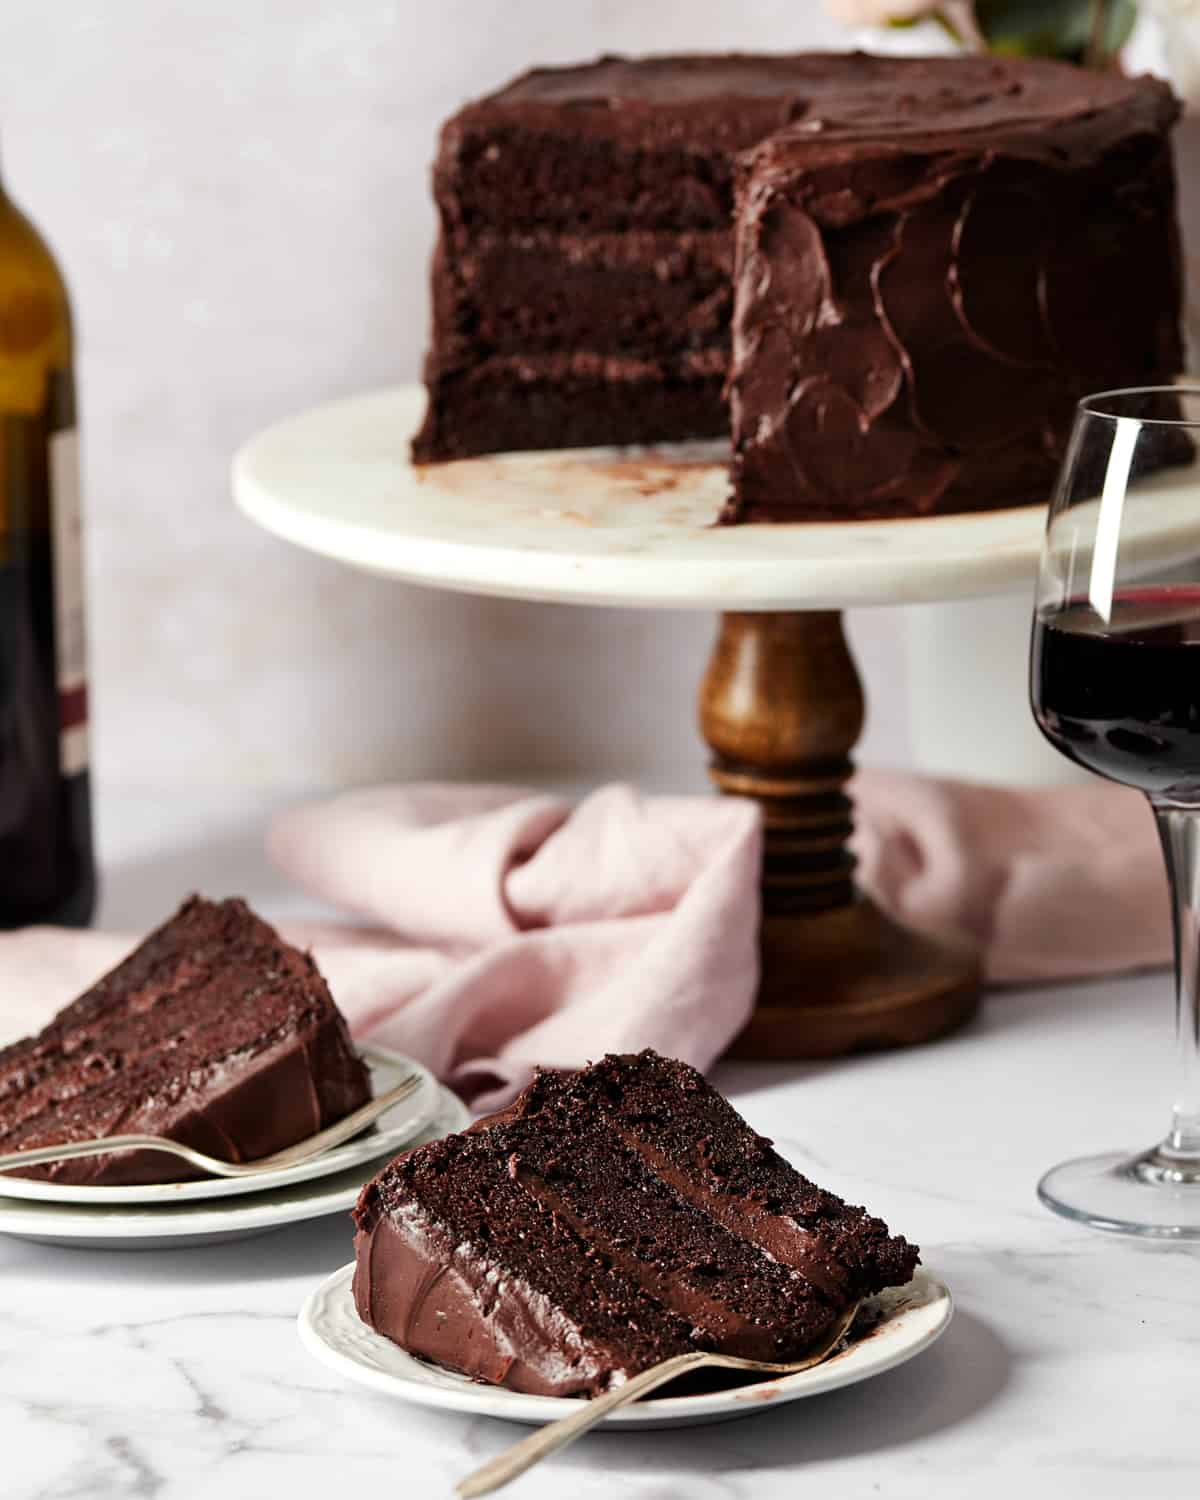 two slice of red wine chocolate cake on plates with the cake in the background.